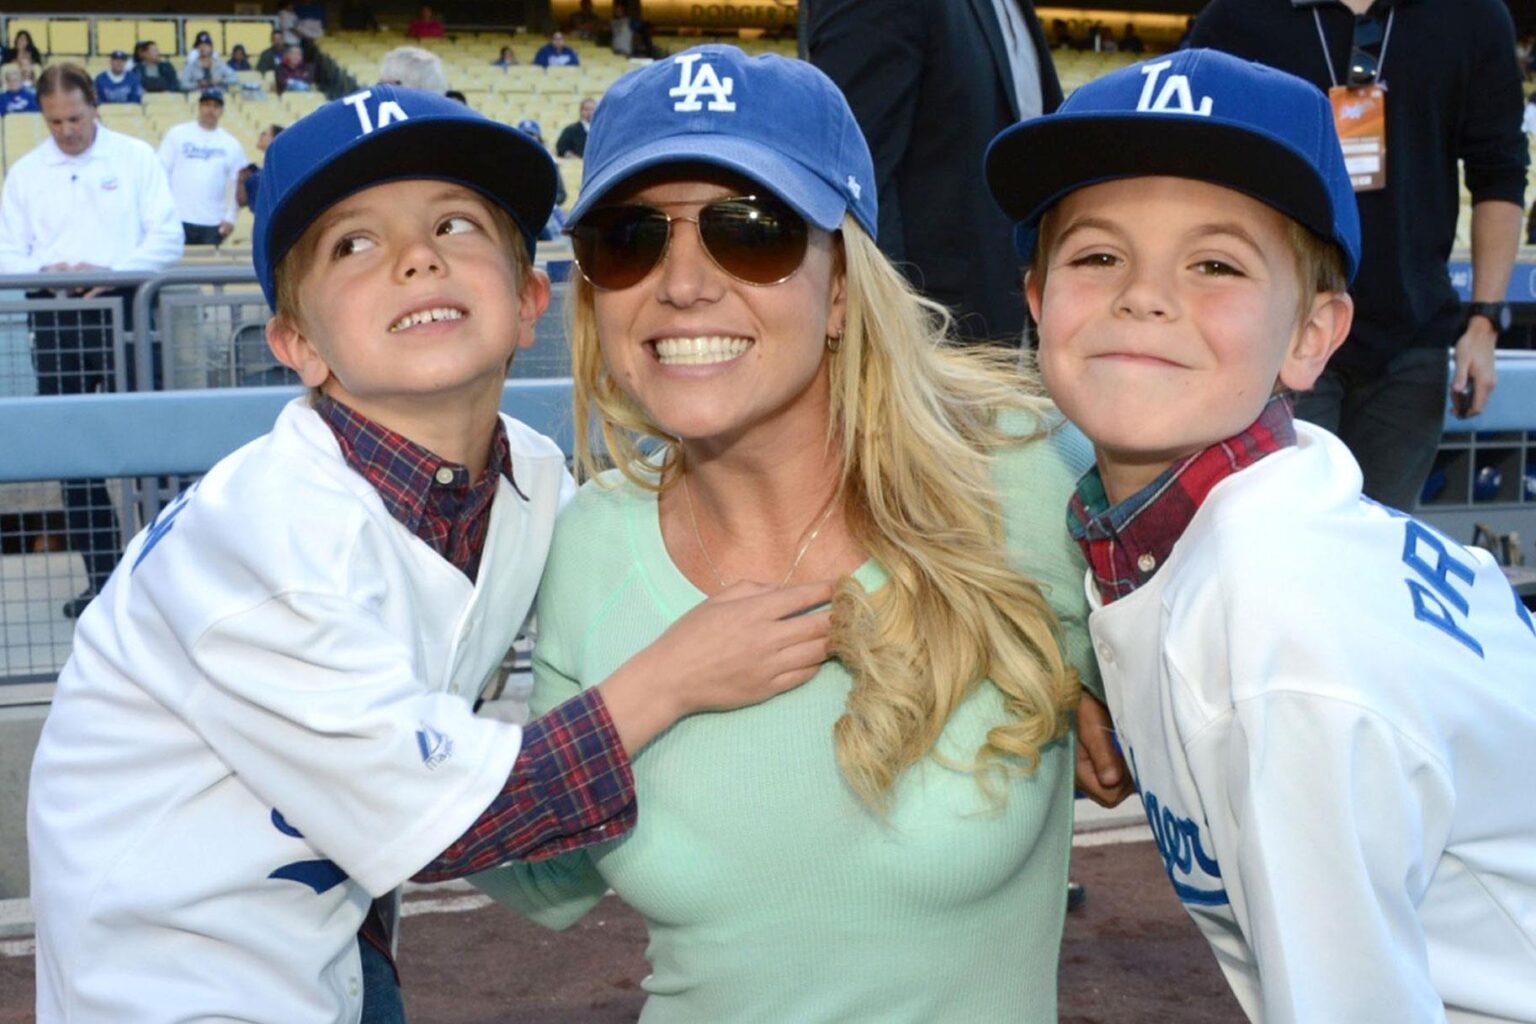 Britney Spears's kids are getting so big! How has Britney Spears been able to deal with the #FreeBritney headlines? With the help of her boys.